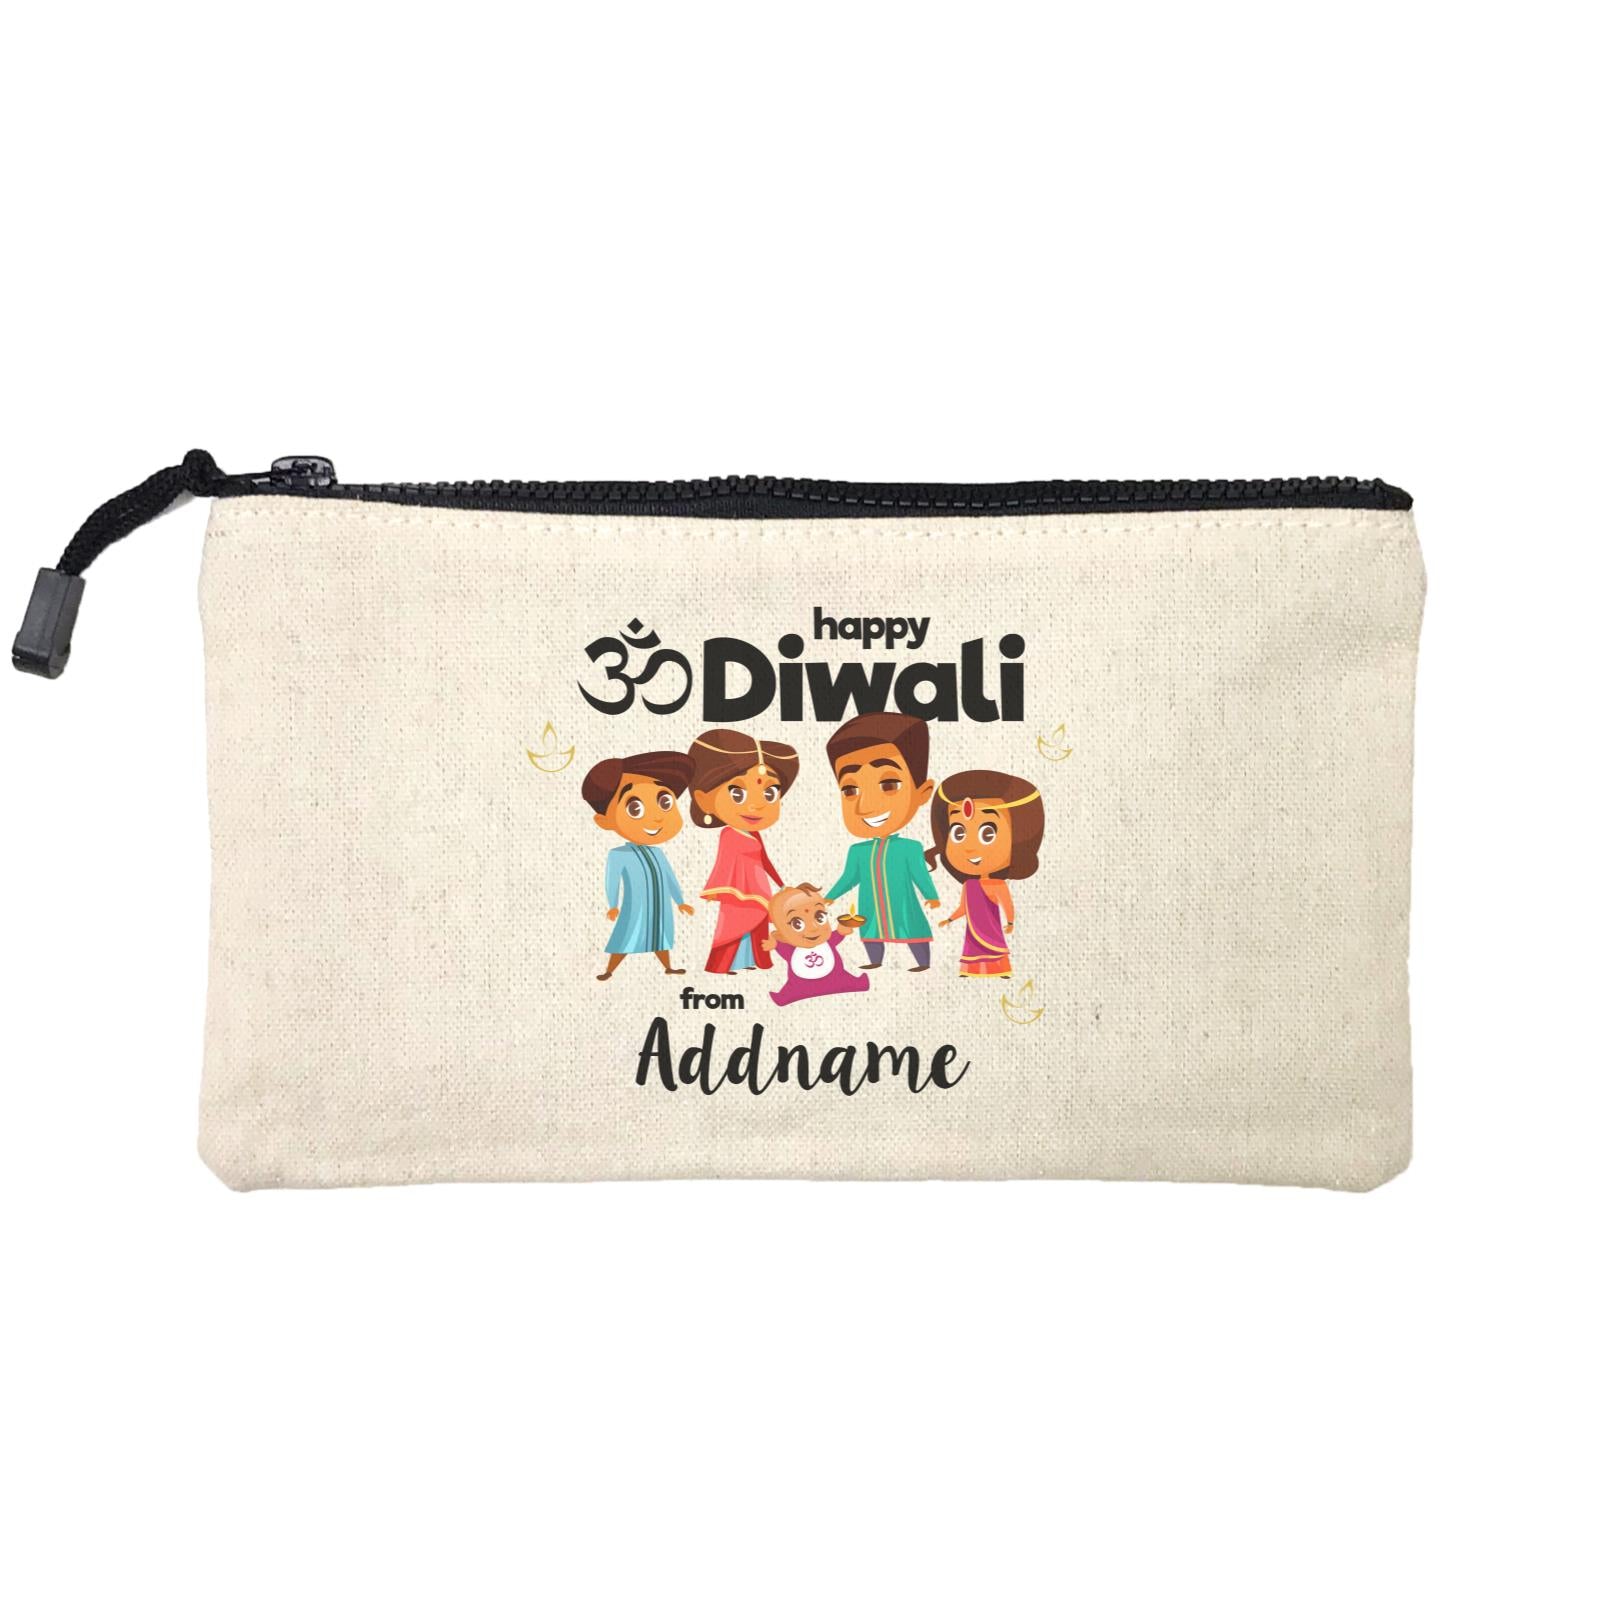 Cute Family Of Five OM Happy Diwali From Addname Mini Accessories Stationery Pouch